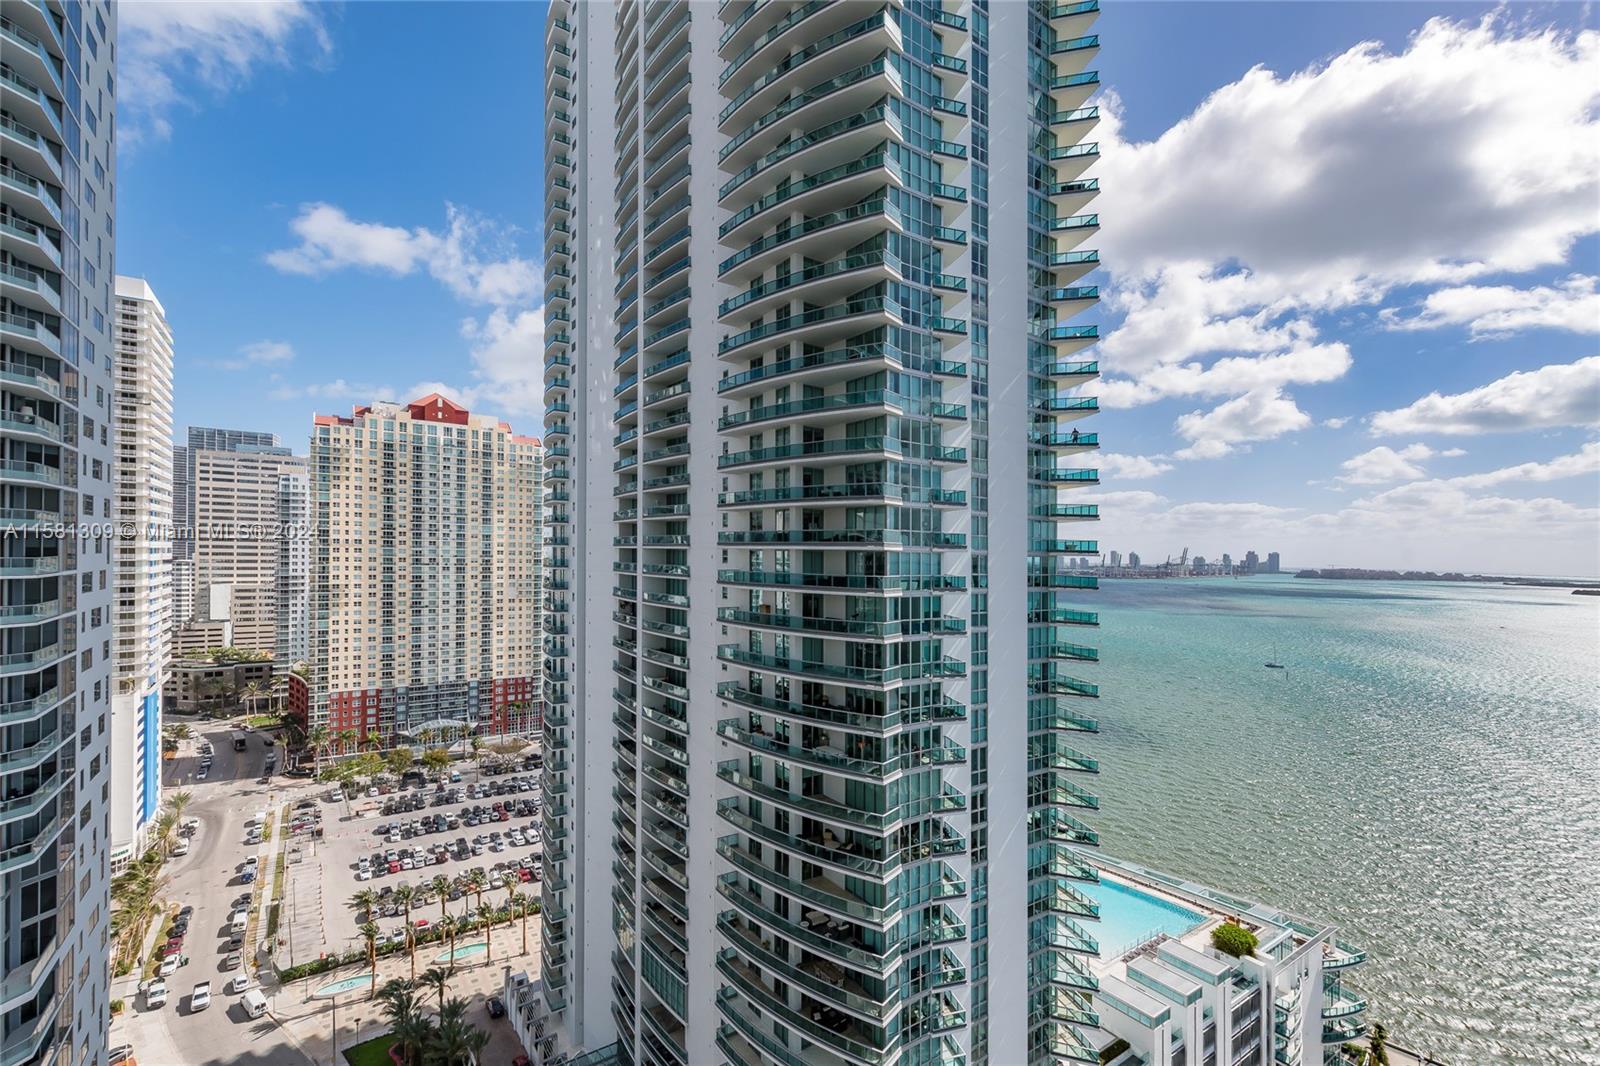 BRIGHT AND SPACIOUS UNIT WITH PANORAMIC VIEWS TO THE CITY AND THE BAY LOCATED AT GORGEOUS AND ELEGANT EMERALD AT BRICKELL BAY. LOCATED IN THE HEART OF BRICKELL FINANCIAL DISTRICT, THIS UNIT OFFERS WOOD AND MARBLE & WOOD (BEDROOMS) FLOORING THROUGHOUT, STAINLESS STEEL APPLIANCES, WALK IN CLOSETS, AND MUCH MORE. EXCLUSIVE EMERALD AT BRICKELL WITH ROOFTOP POOL, CLUB ROOM, FITNESS CENTER , BUSINESS CENTER, 24/7 SECURITY VALET PARKING AND MORE. WALK TO FINEST SHOPPING, RESTAURANTS, BANKING, ENTERTAINMENT AND MORE. ENJOY SE FLORIDA AT ITS BEST!